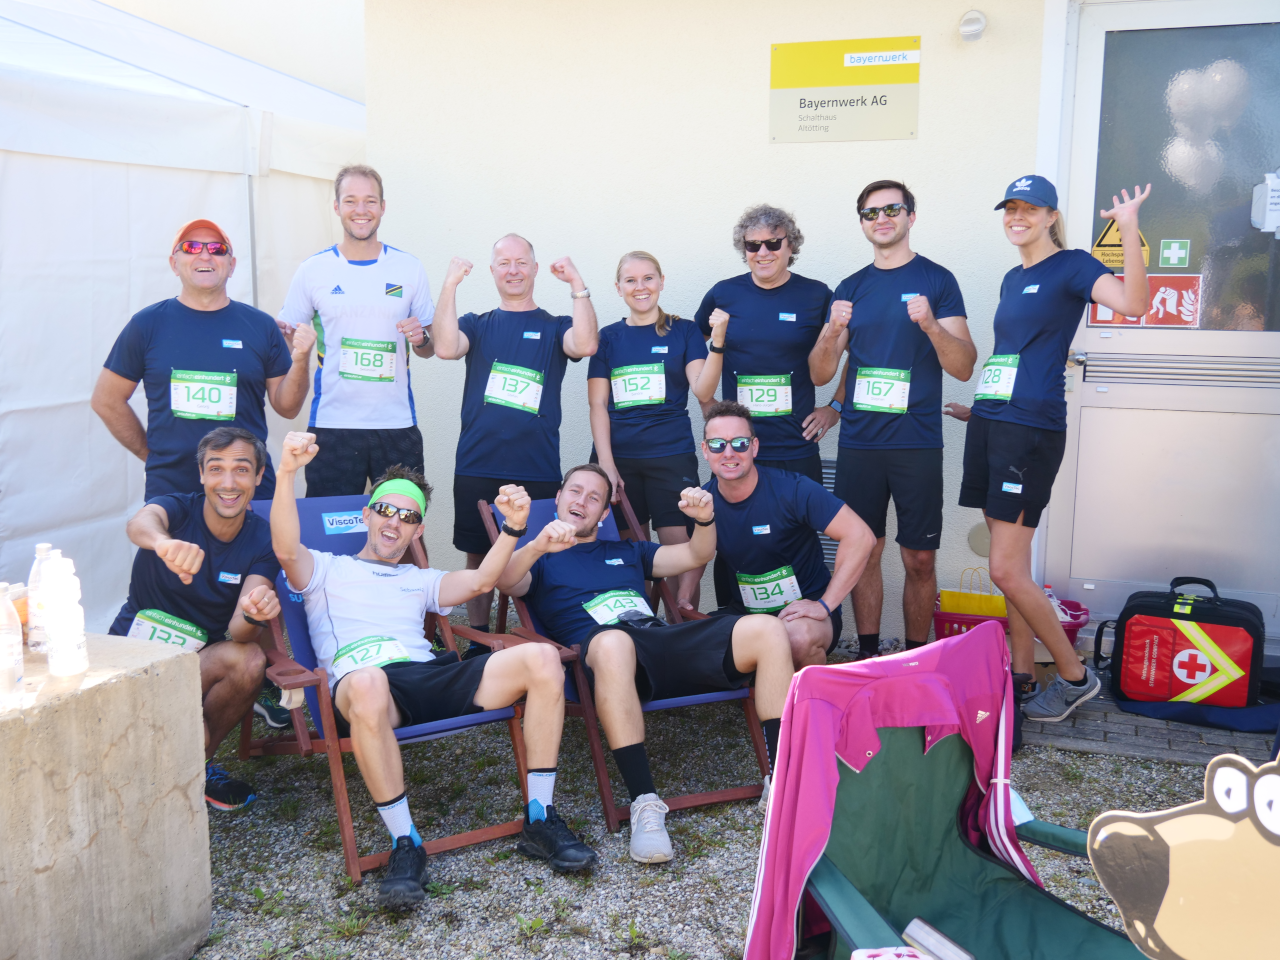 A large part of the ViscoTec runners at the "run-in" of the charity run in Altötting